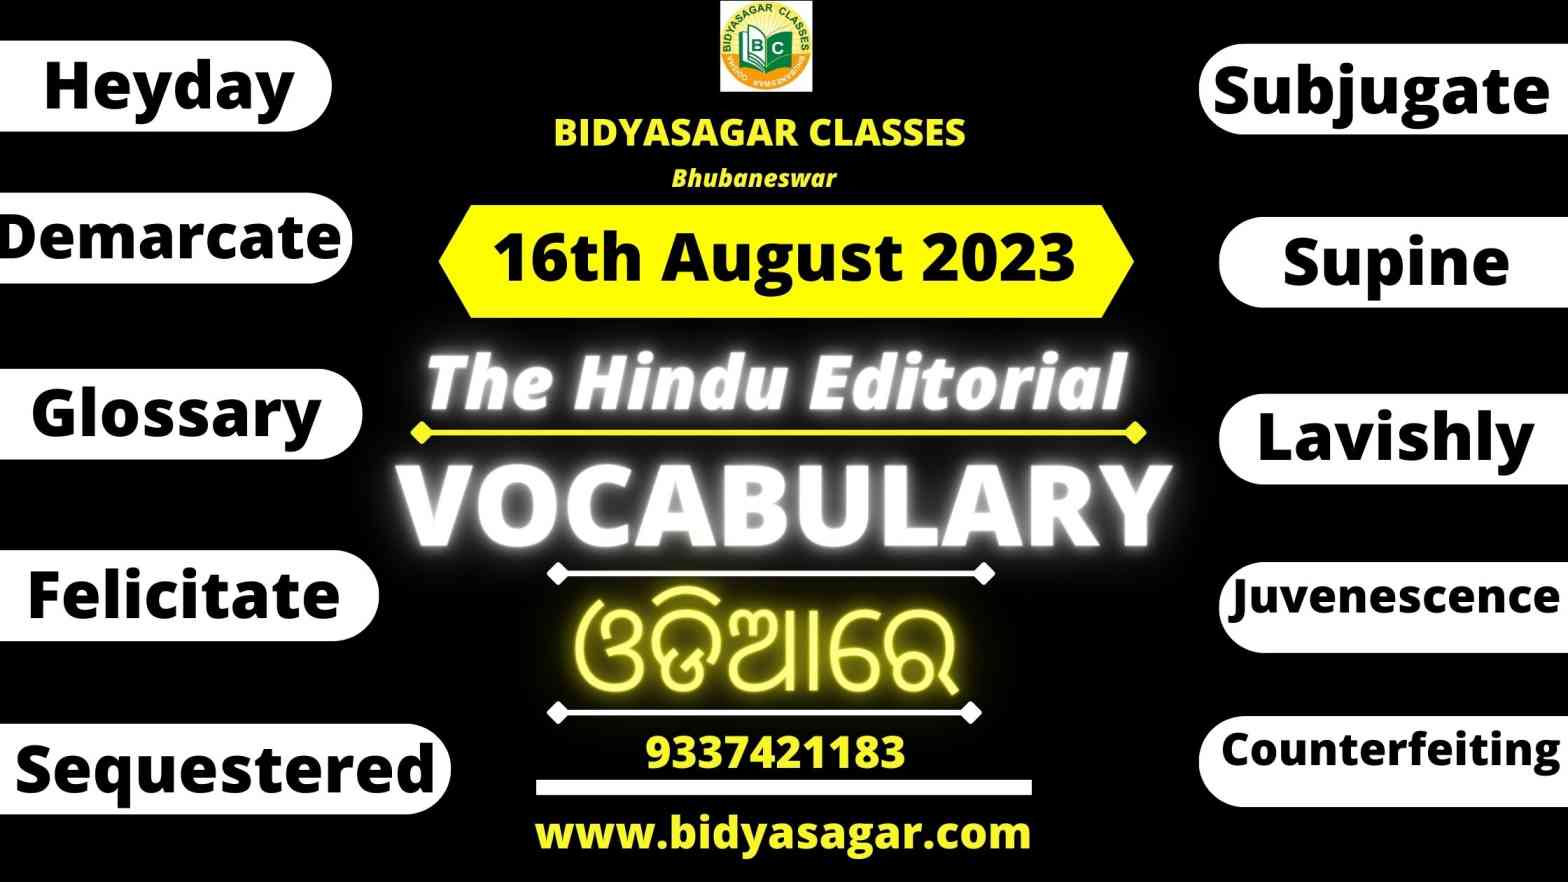 The Hindu Editorial Vocabulary of 16th August 2023